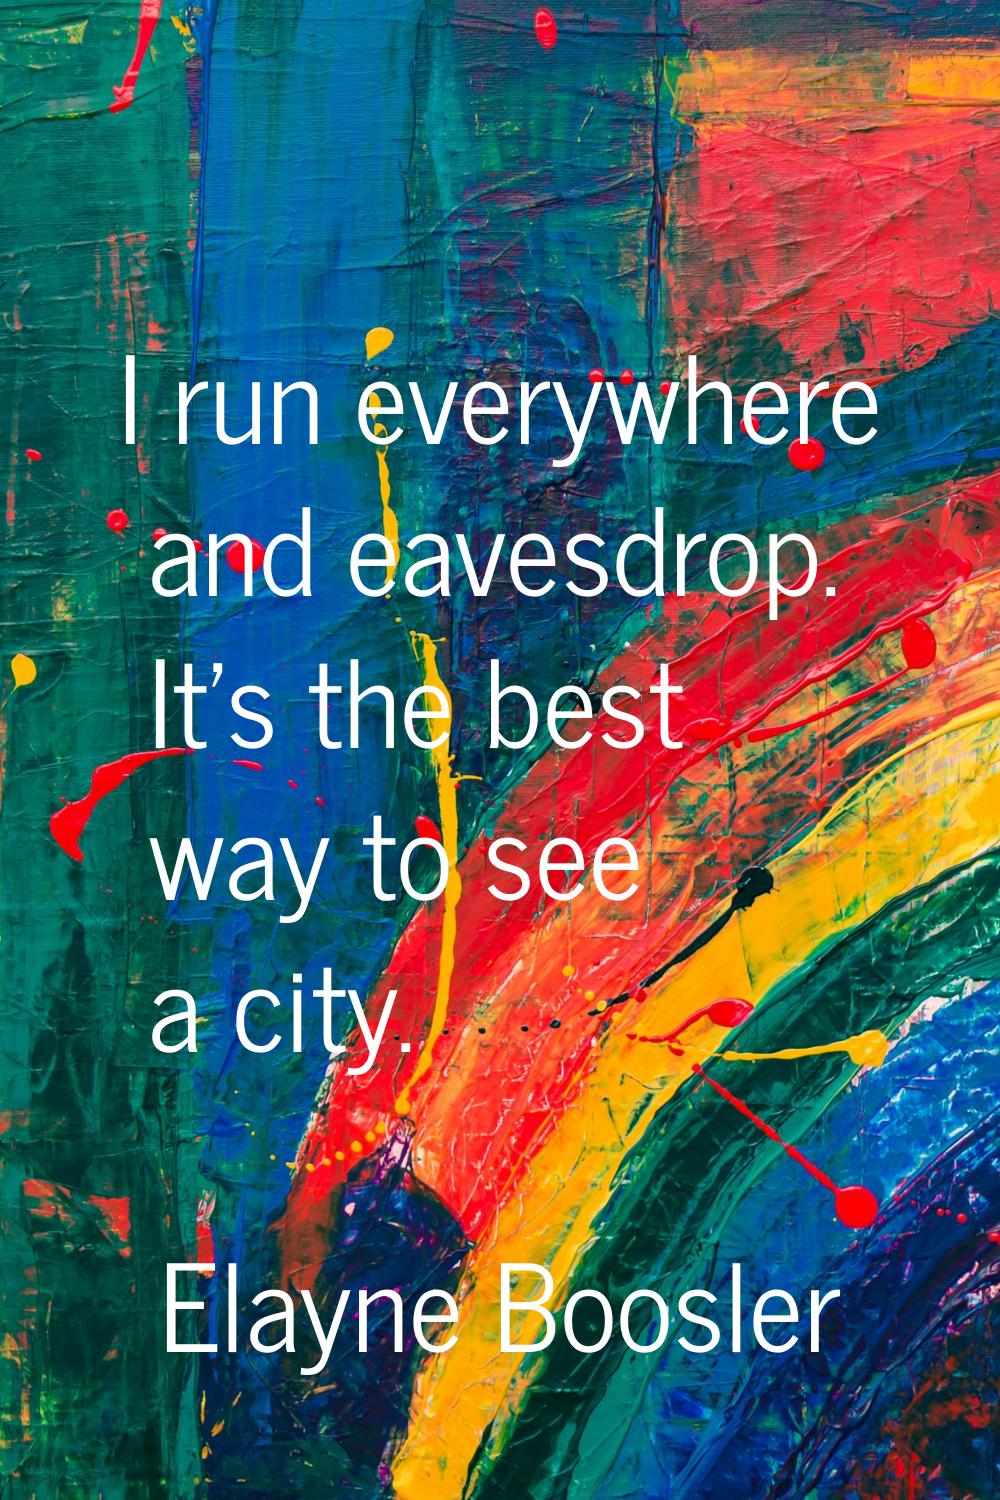 I run everywhere and eavesdrop. It's the best way to see a city.